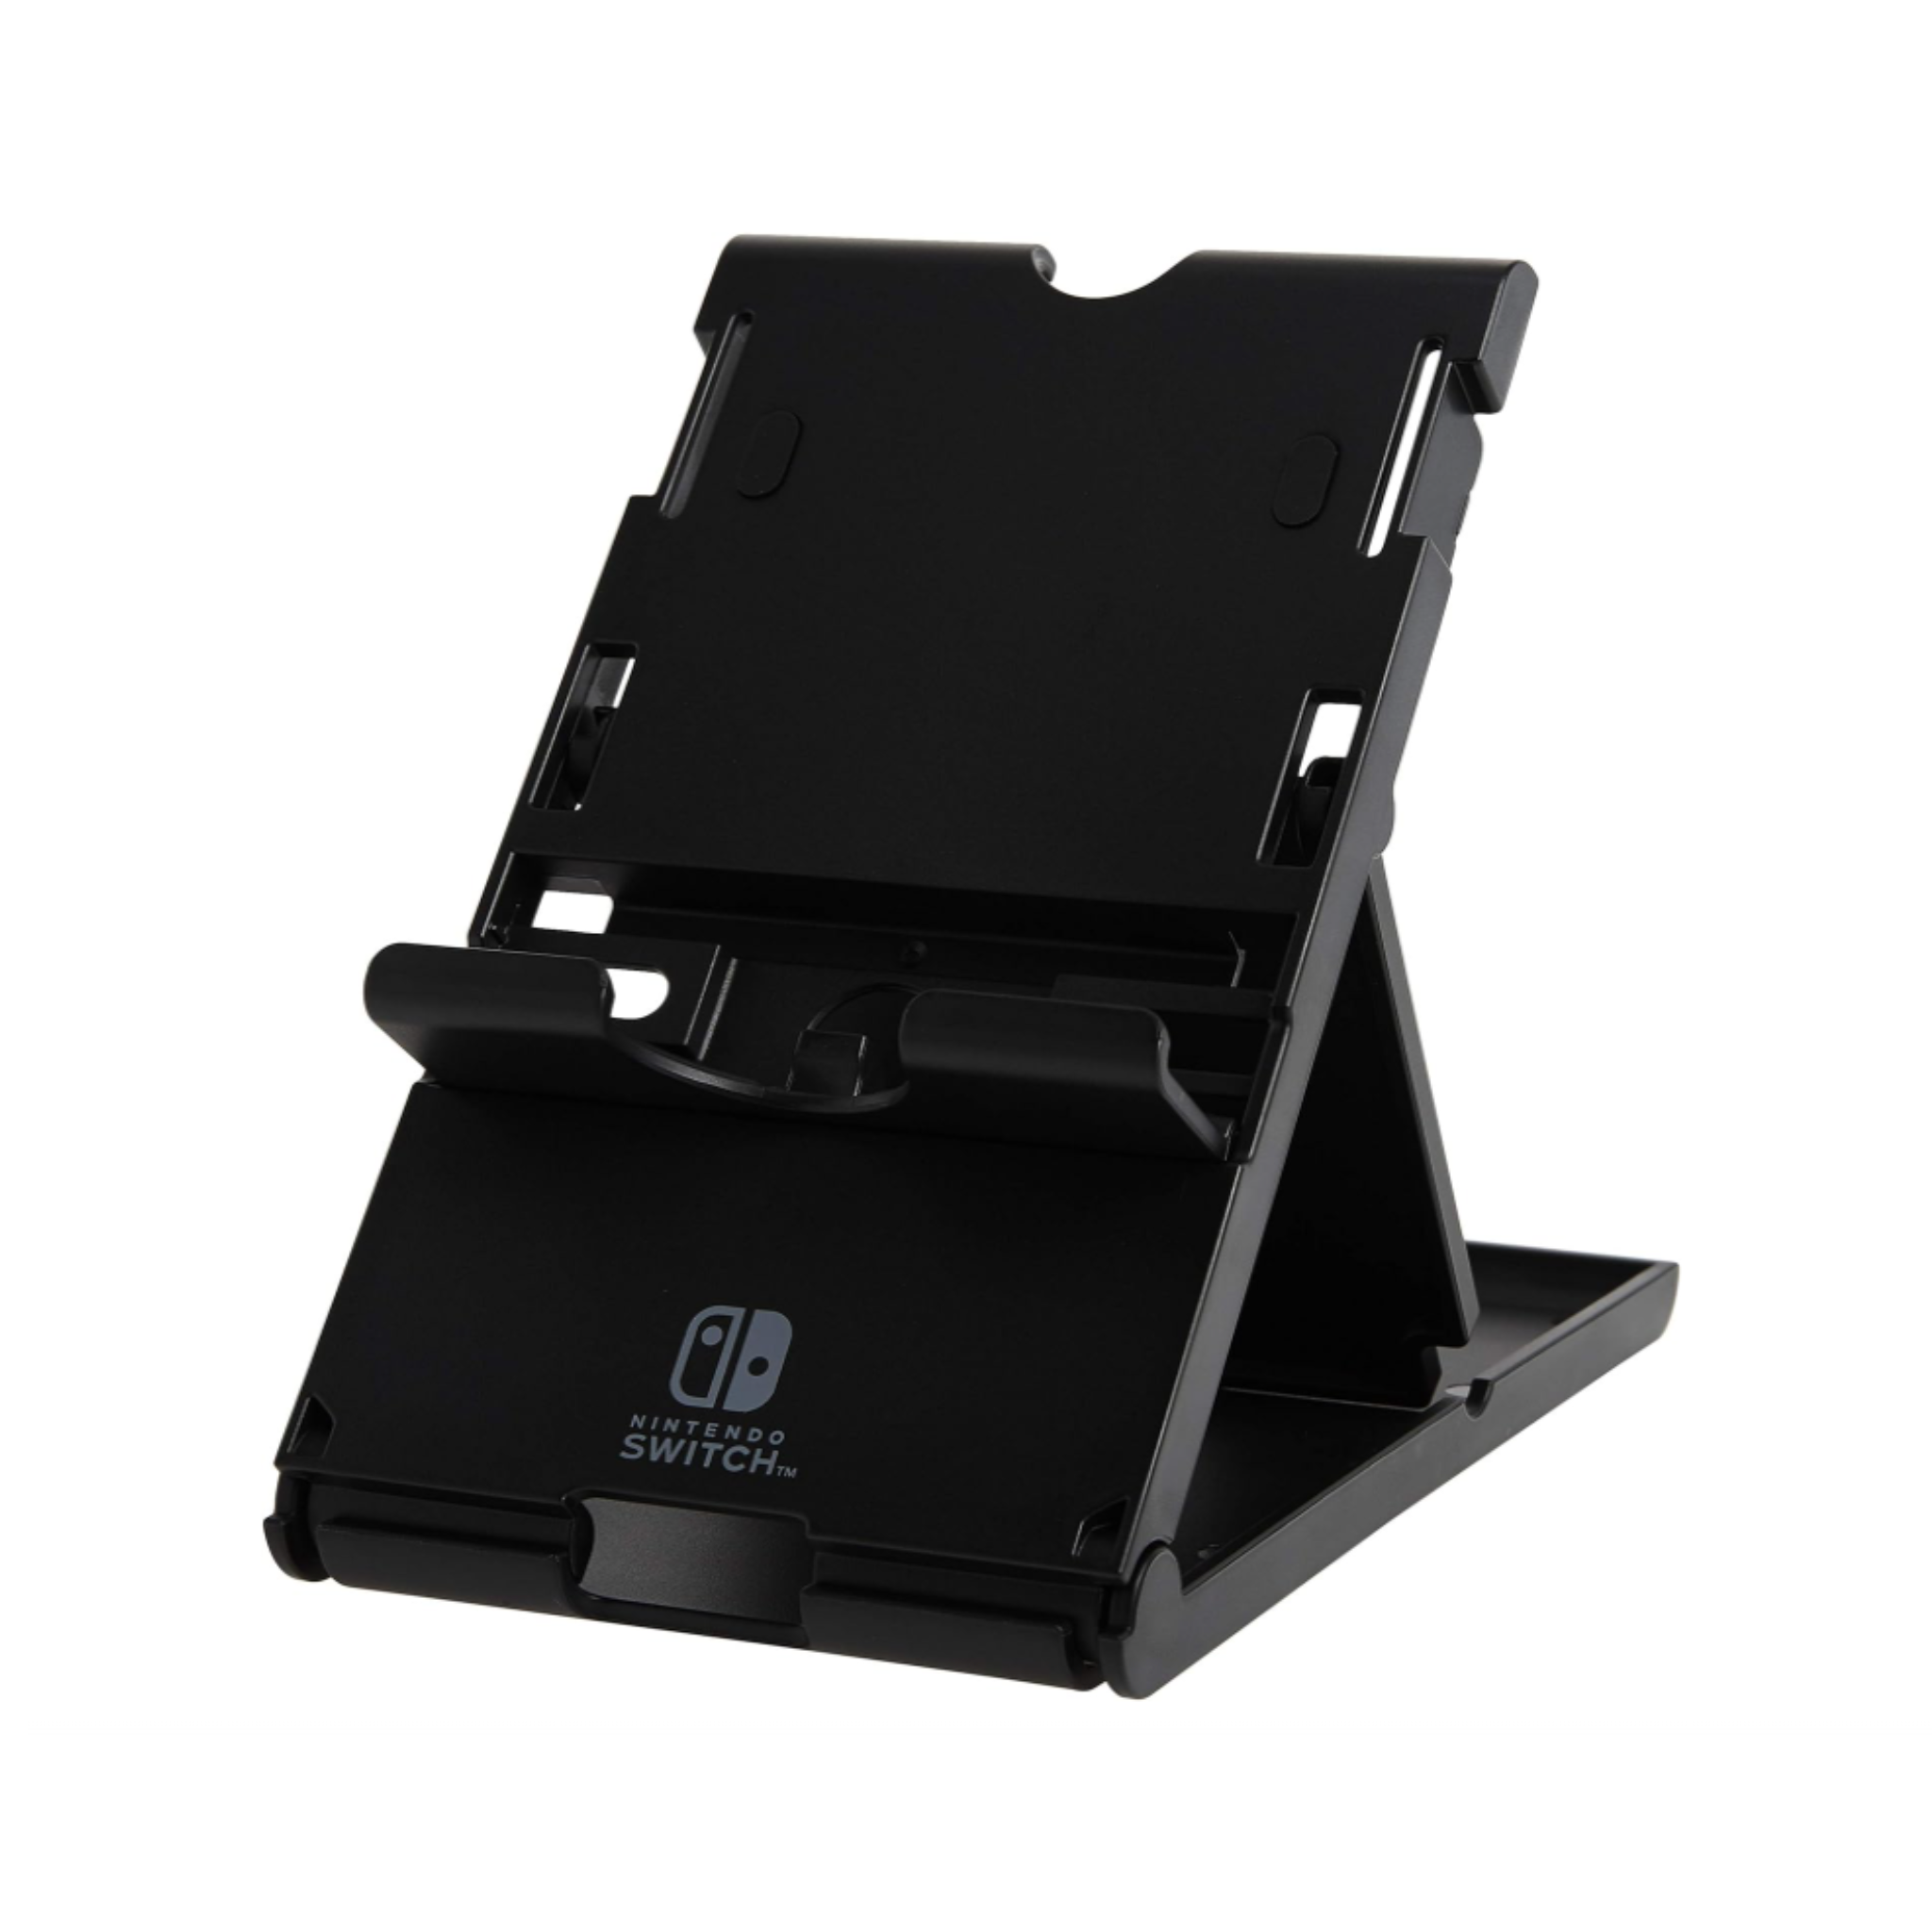 Image of Black Playstand for Nintendo Switch